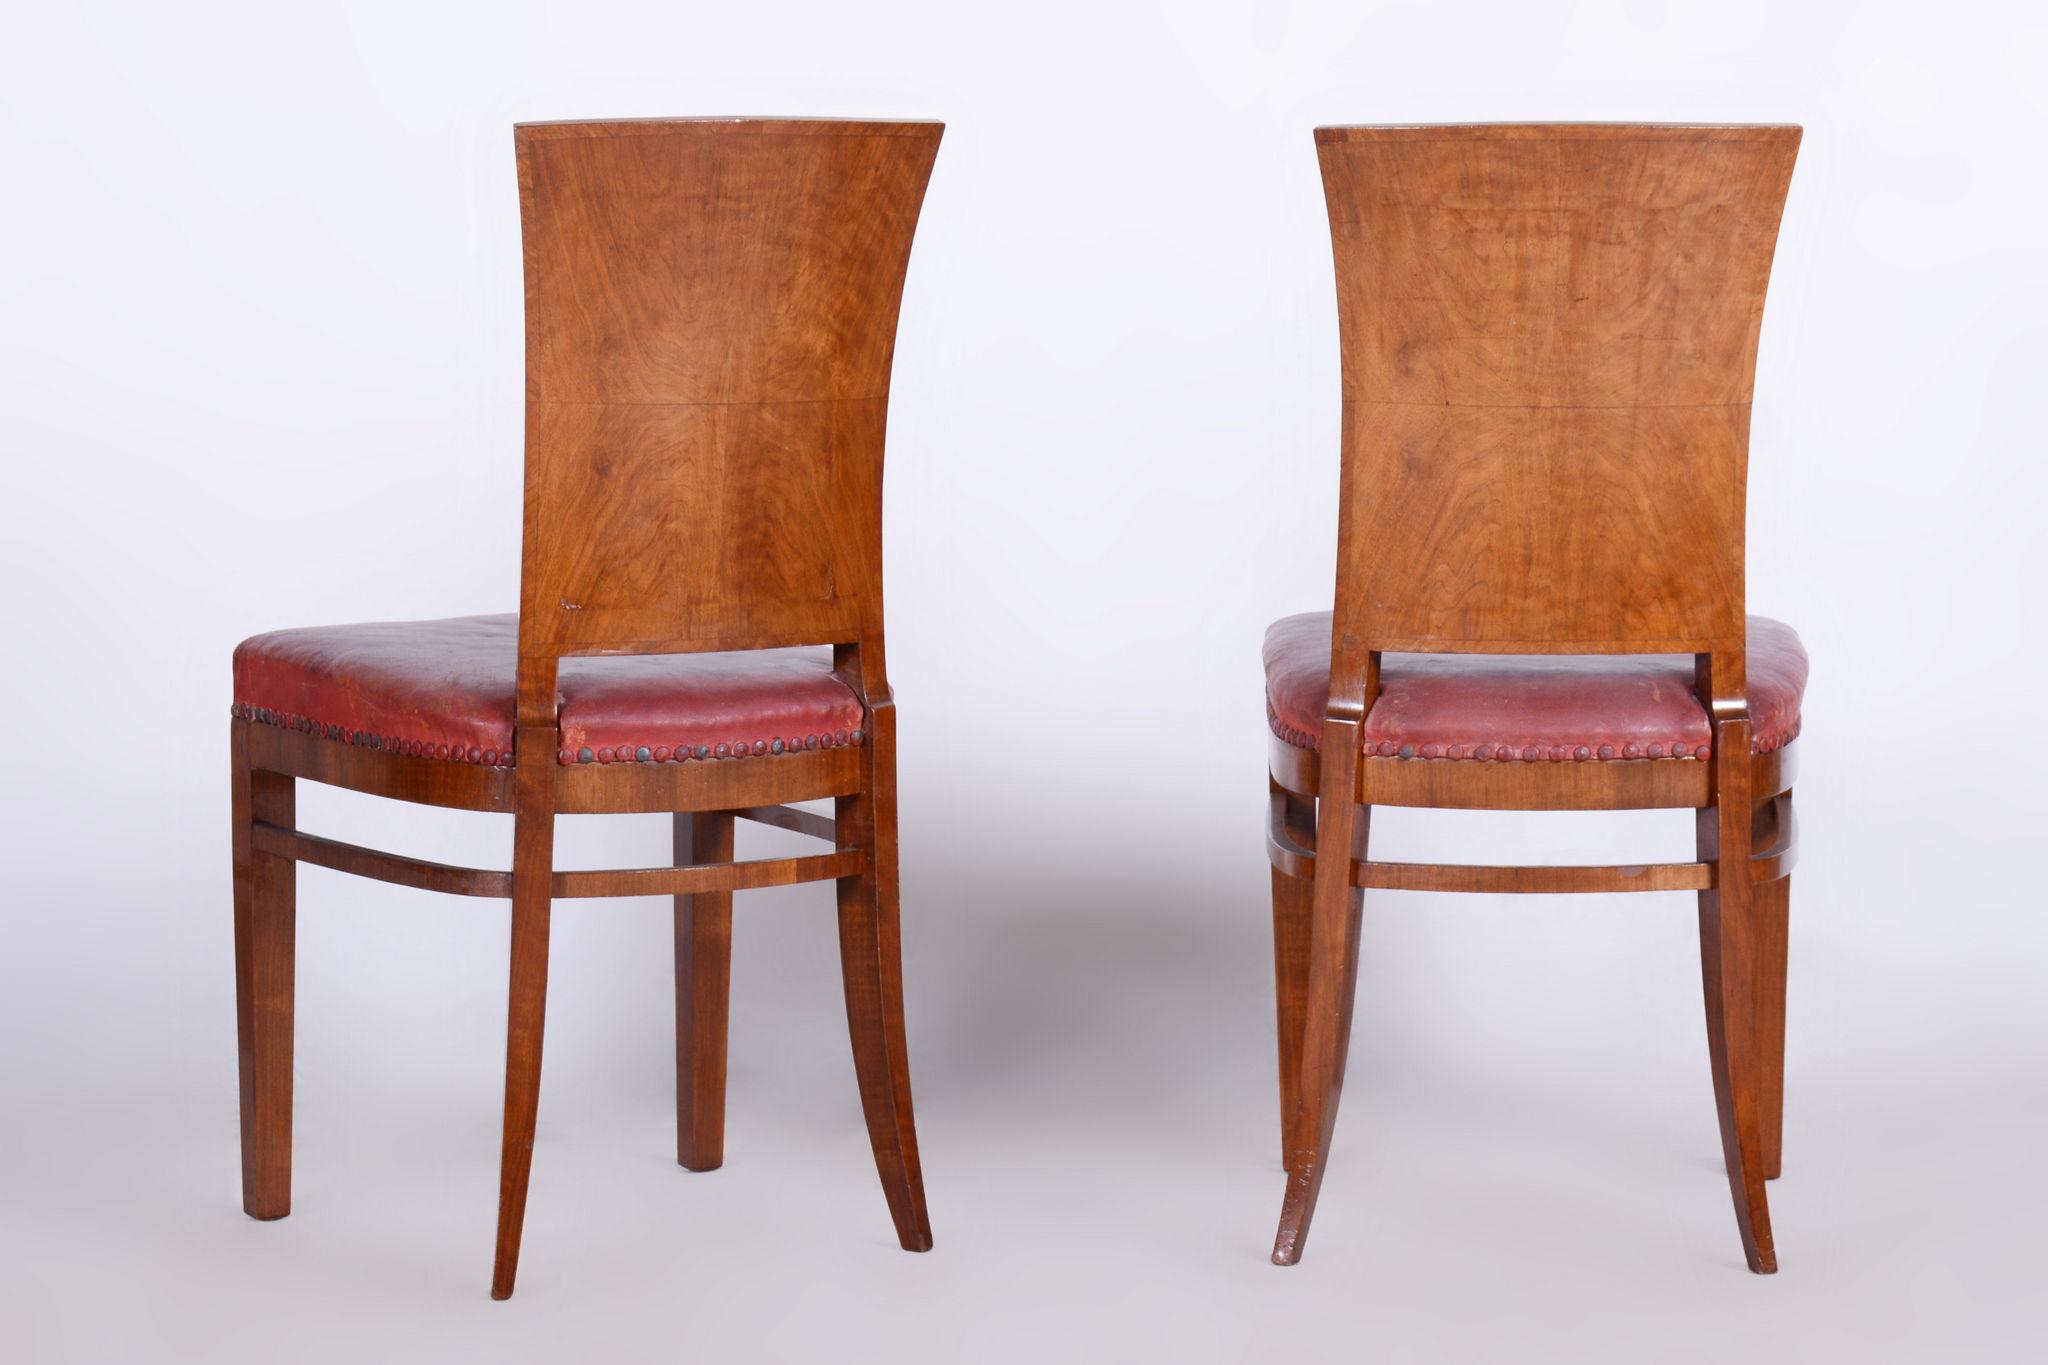 Six Art Deco Chairs, Walnut, Restored, Original Upholstery, France, 1920s For Sale 5